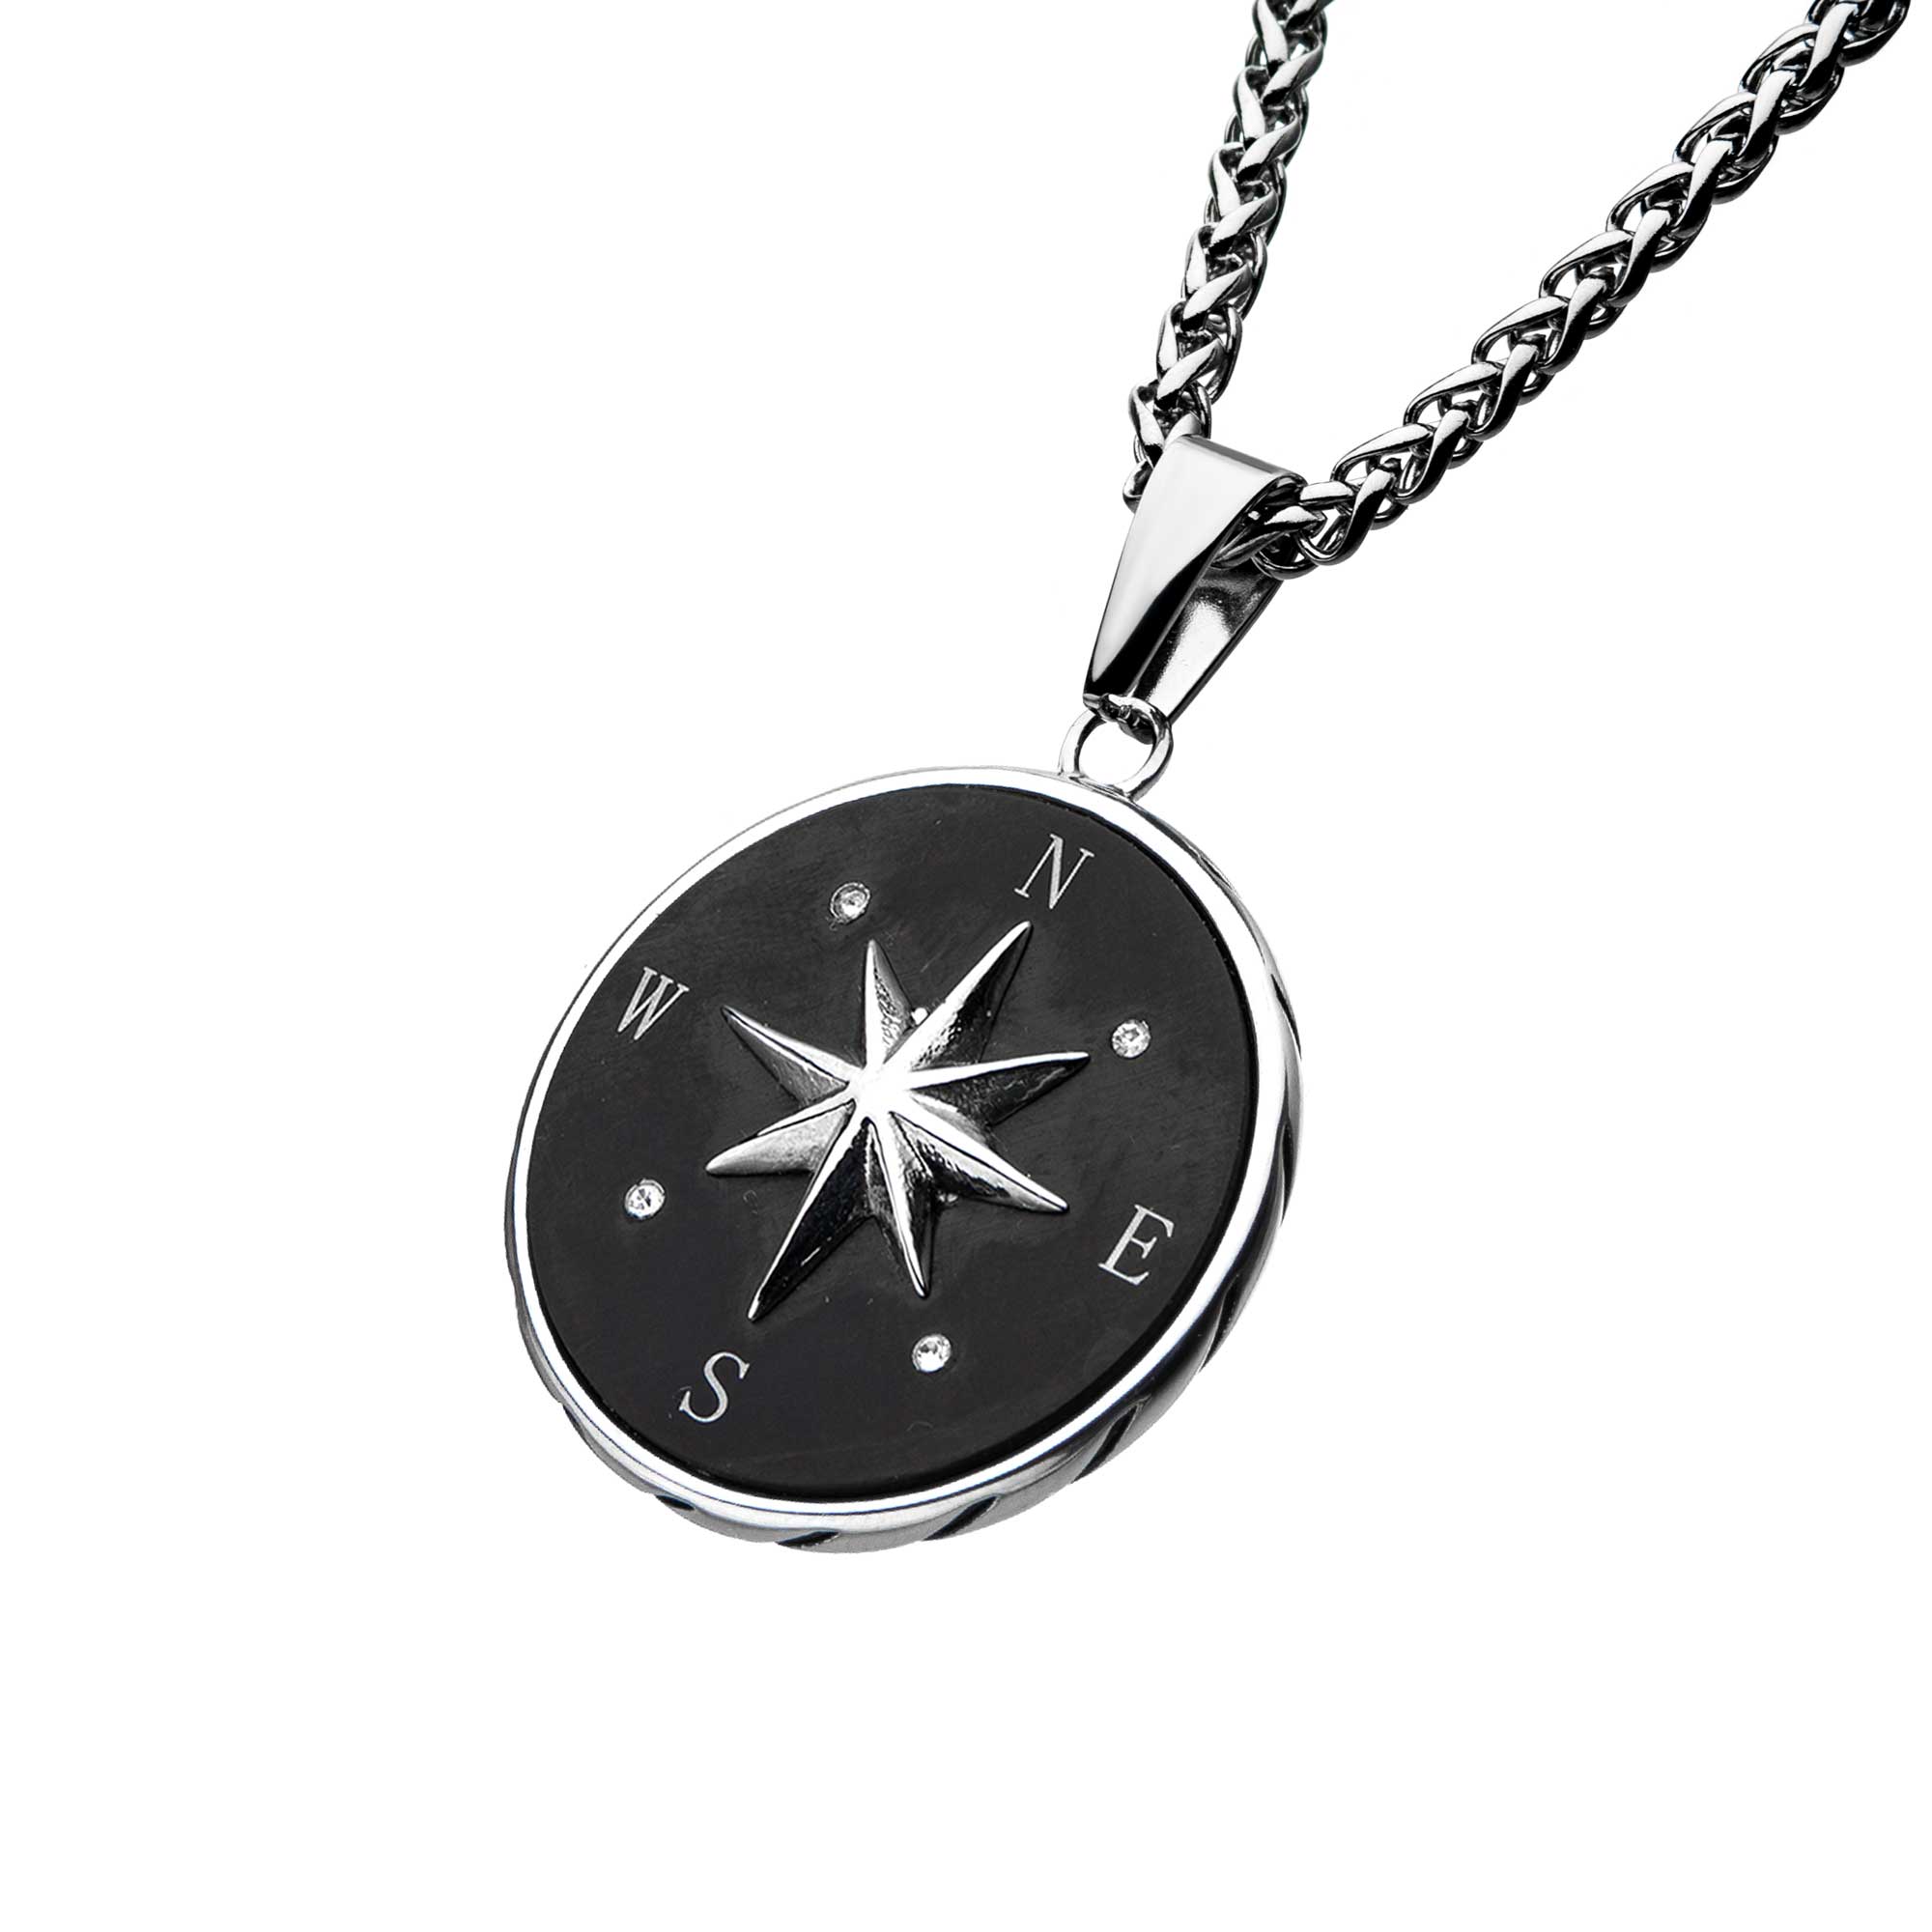 Stainless Steel and Black Plated Compass Pendant with Chain Image 2 Carroll / Ochs Jewelers Monroe, MI